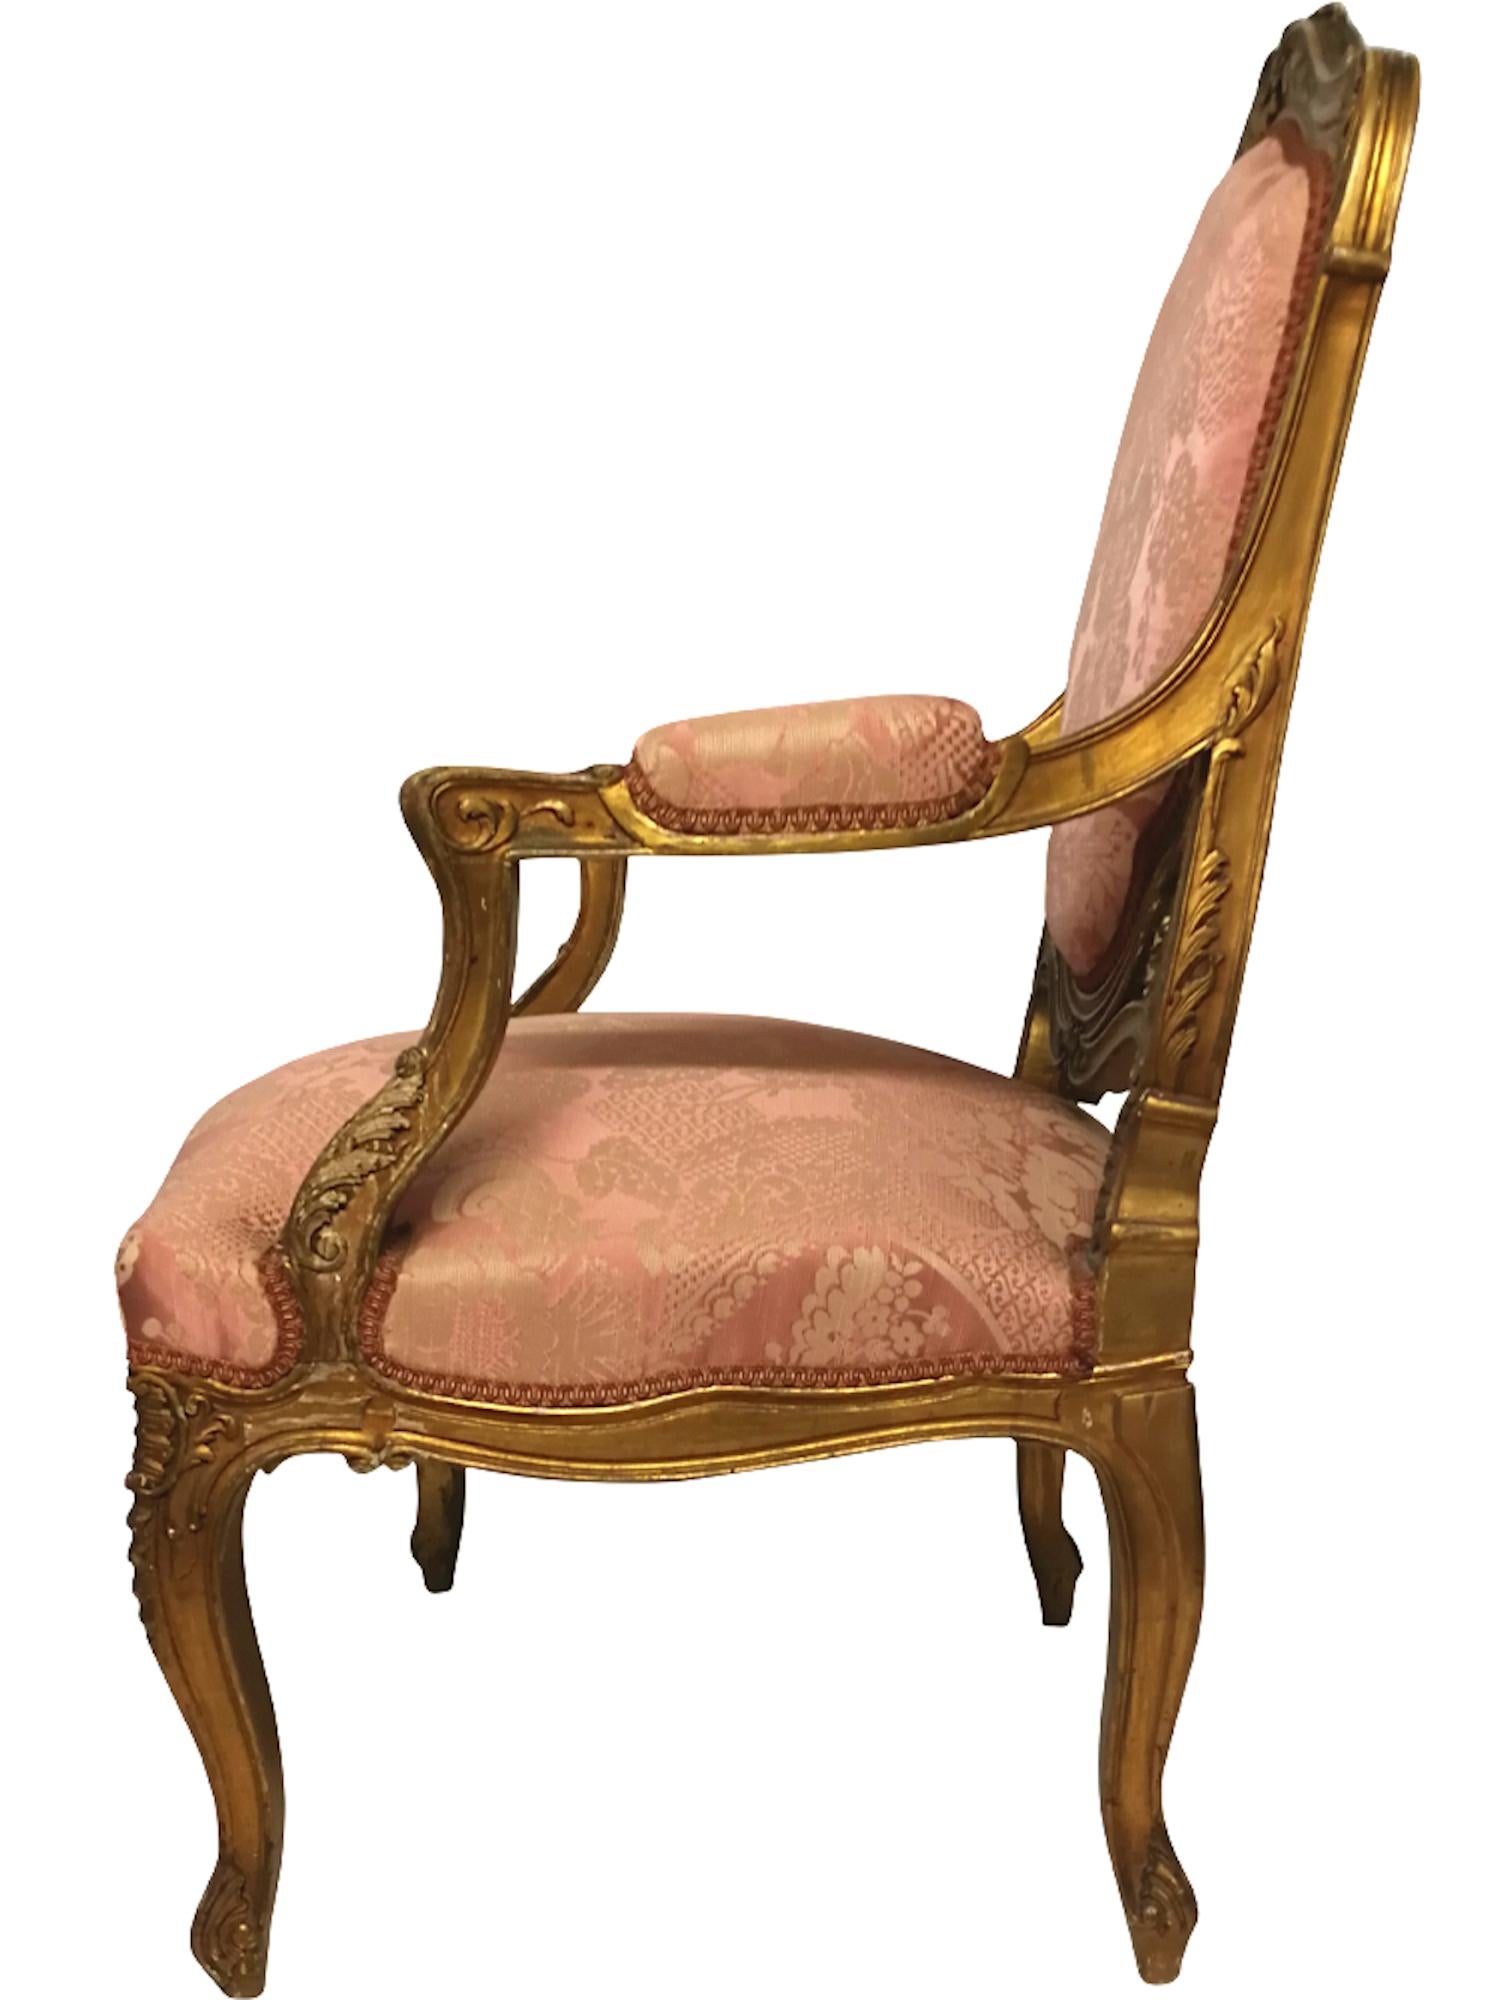 Gilt hand carved wood armchair from the 19th century in Louis XV style and with silk upholstery.
Origin: France.
Period: 19th century, Napoleon III period.